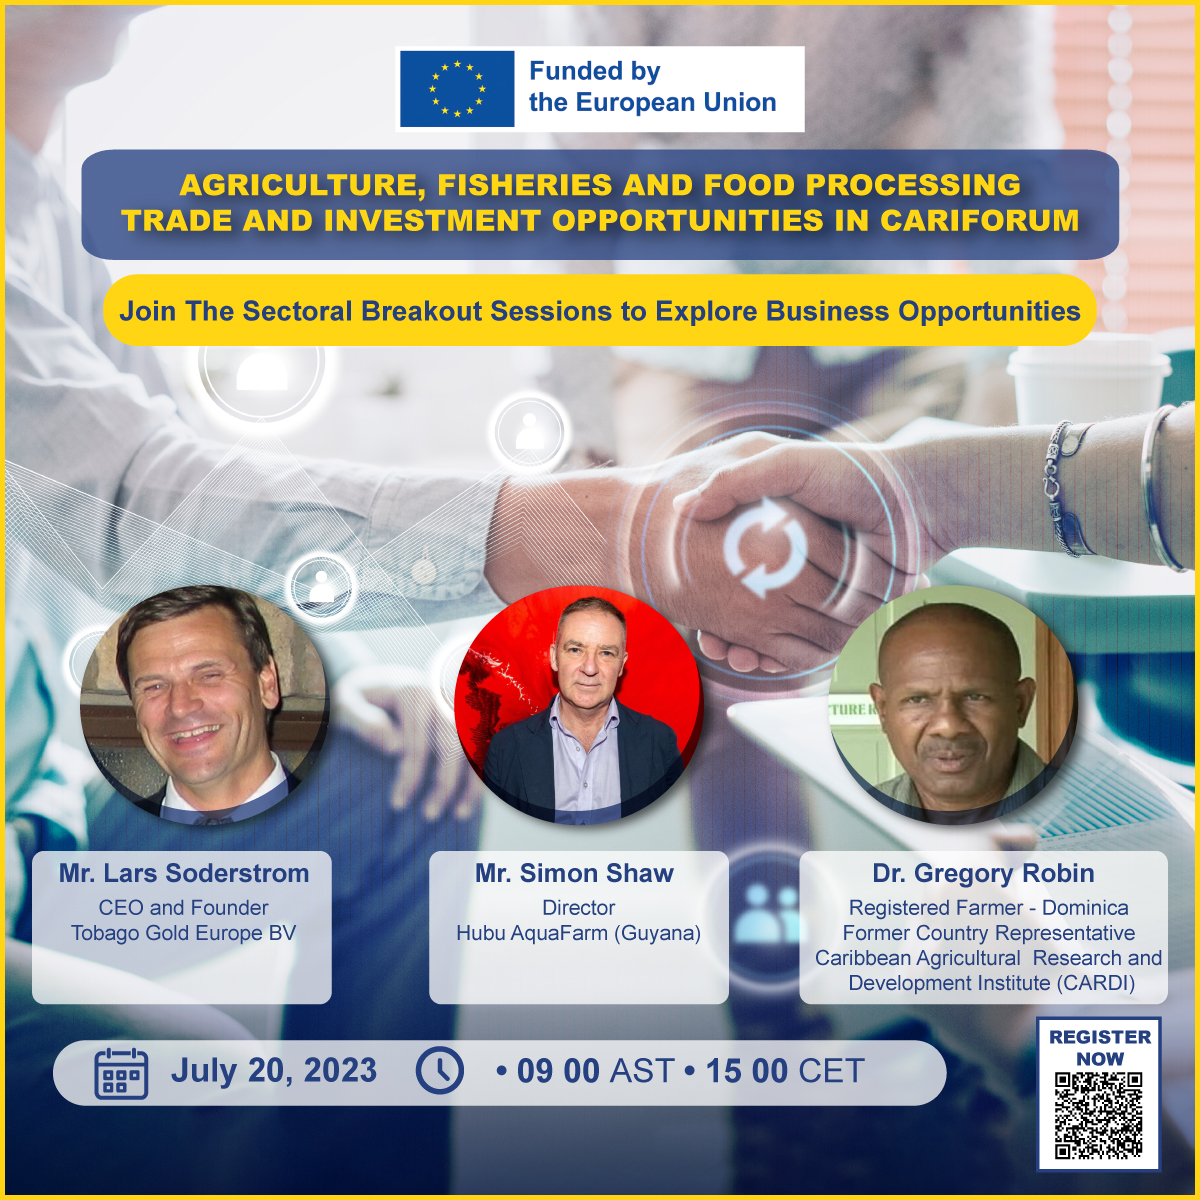 #Itsnottoolate 
Are you interested in learning more about #trade and #investment opportunities under the CARIFORUM-EU Economic Partnership Agreement in #Agriculture, #Fisheries and  #FoodProcessing?
Join the conversation, and register now:  rb.gy/mgou9